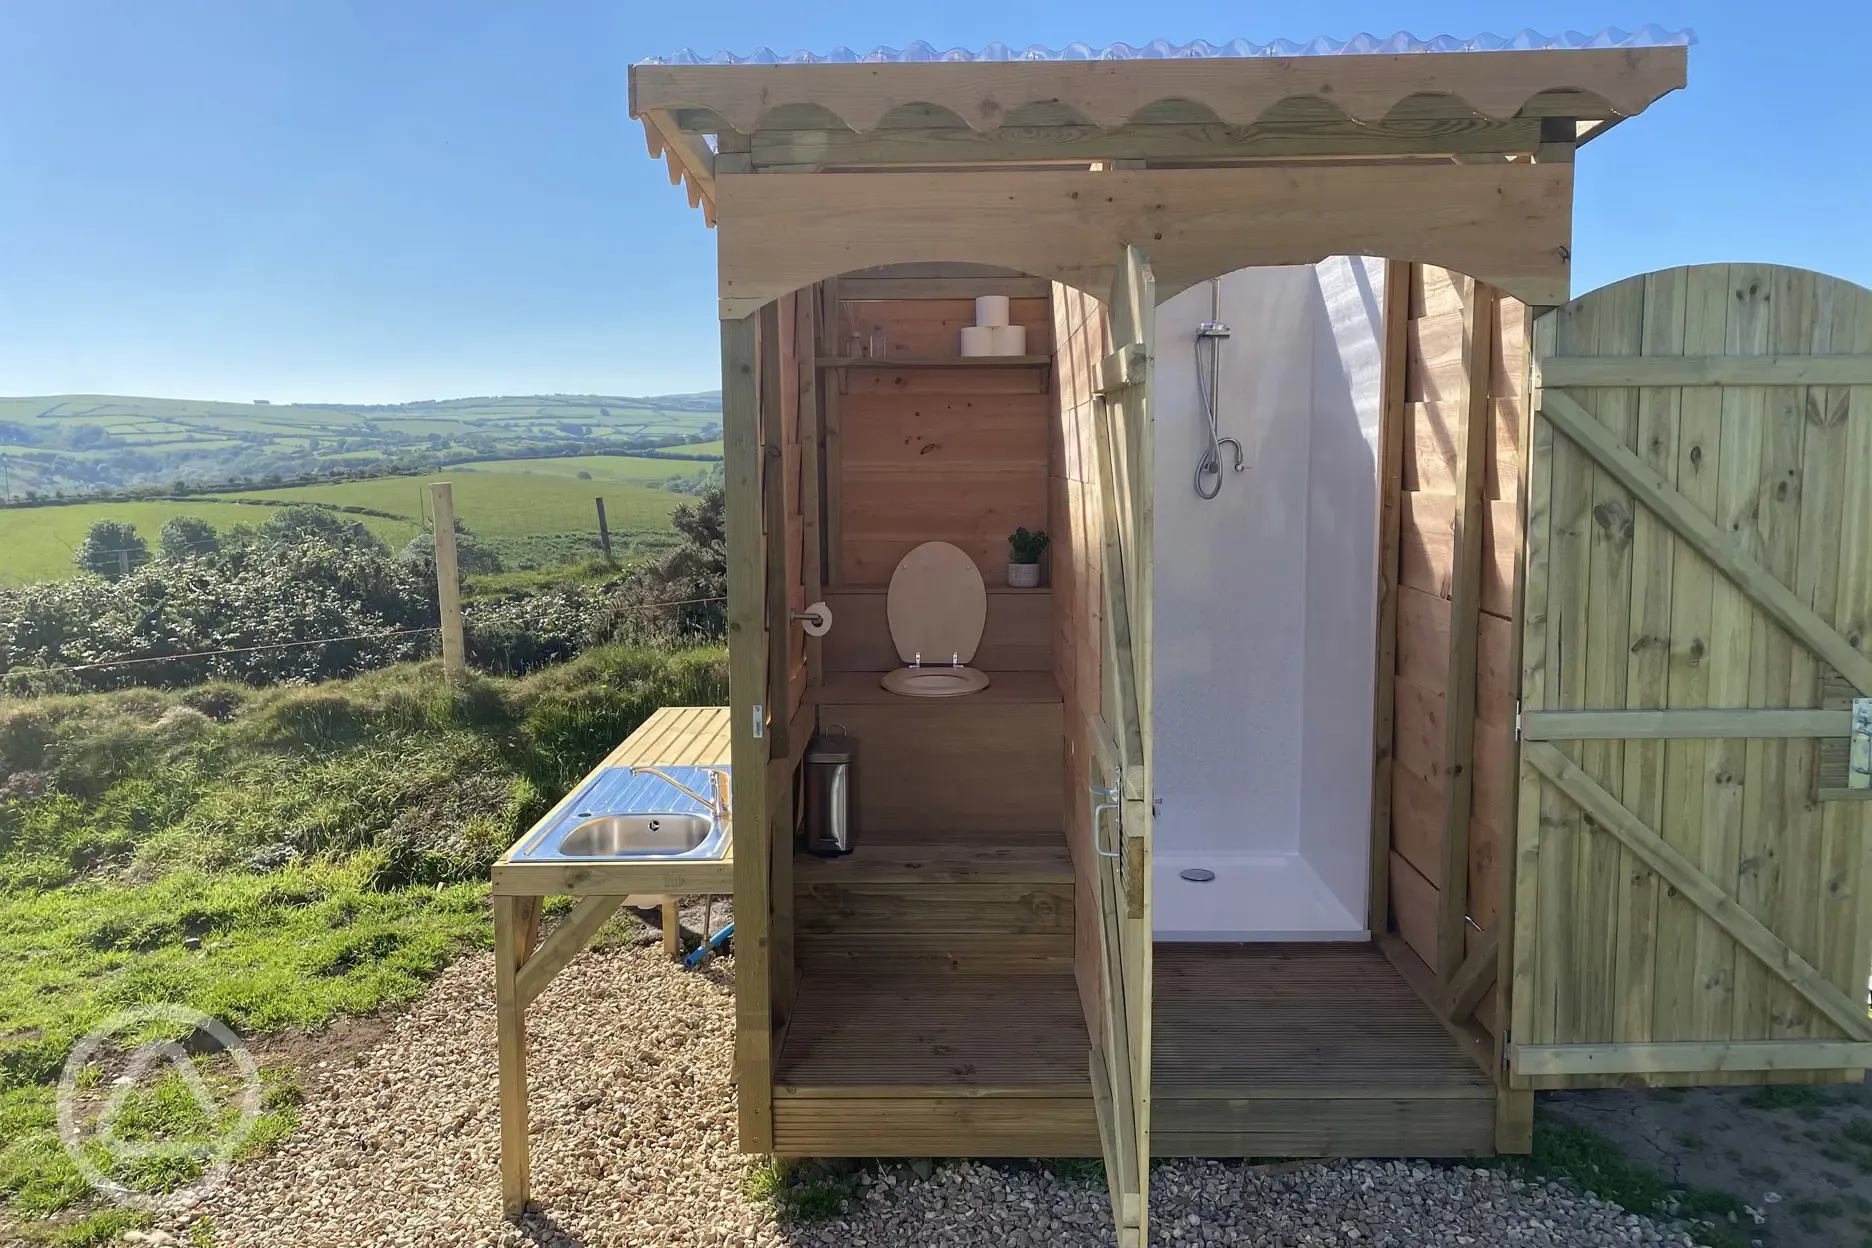 Compost loo, shower and washing up area